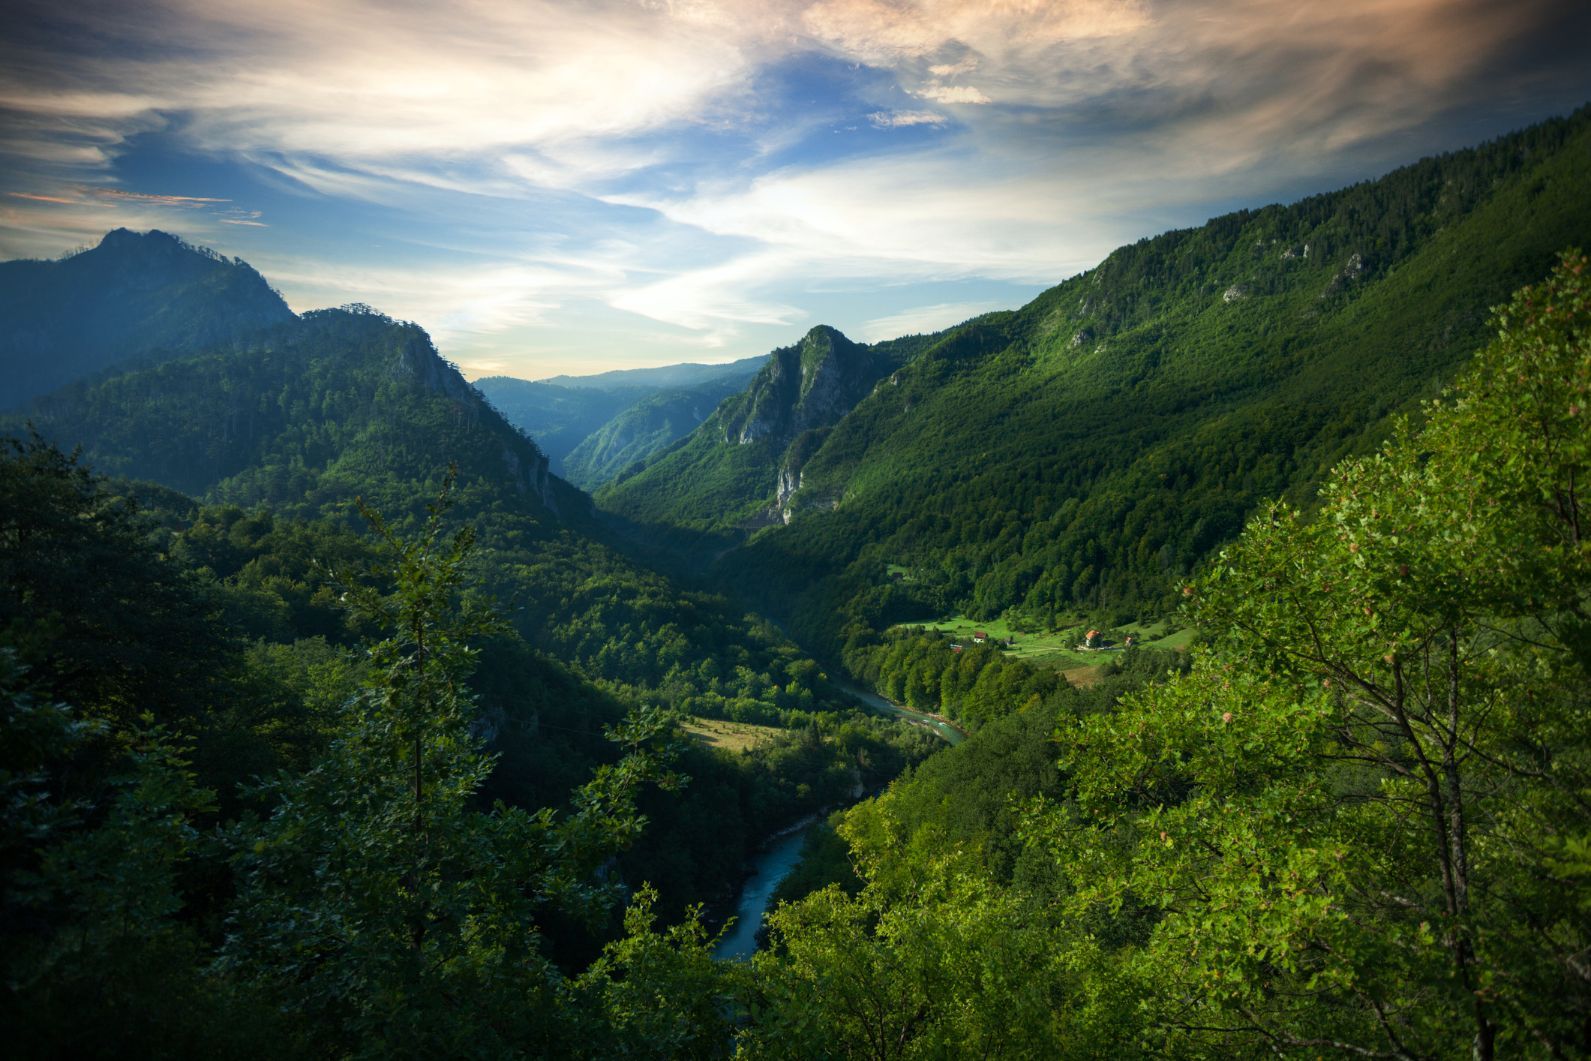 Sunset over Tara river canyon, the biggest canyon in Europe, found in the Durmitor national park, Montenegro. Photo: Getty